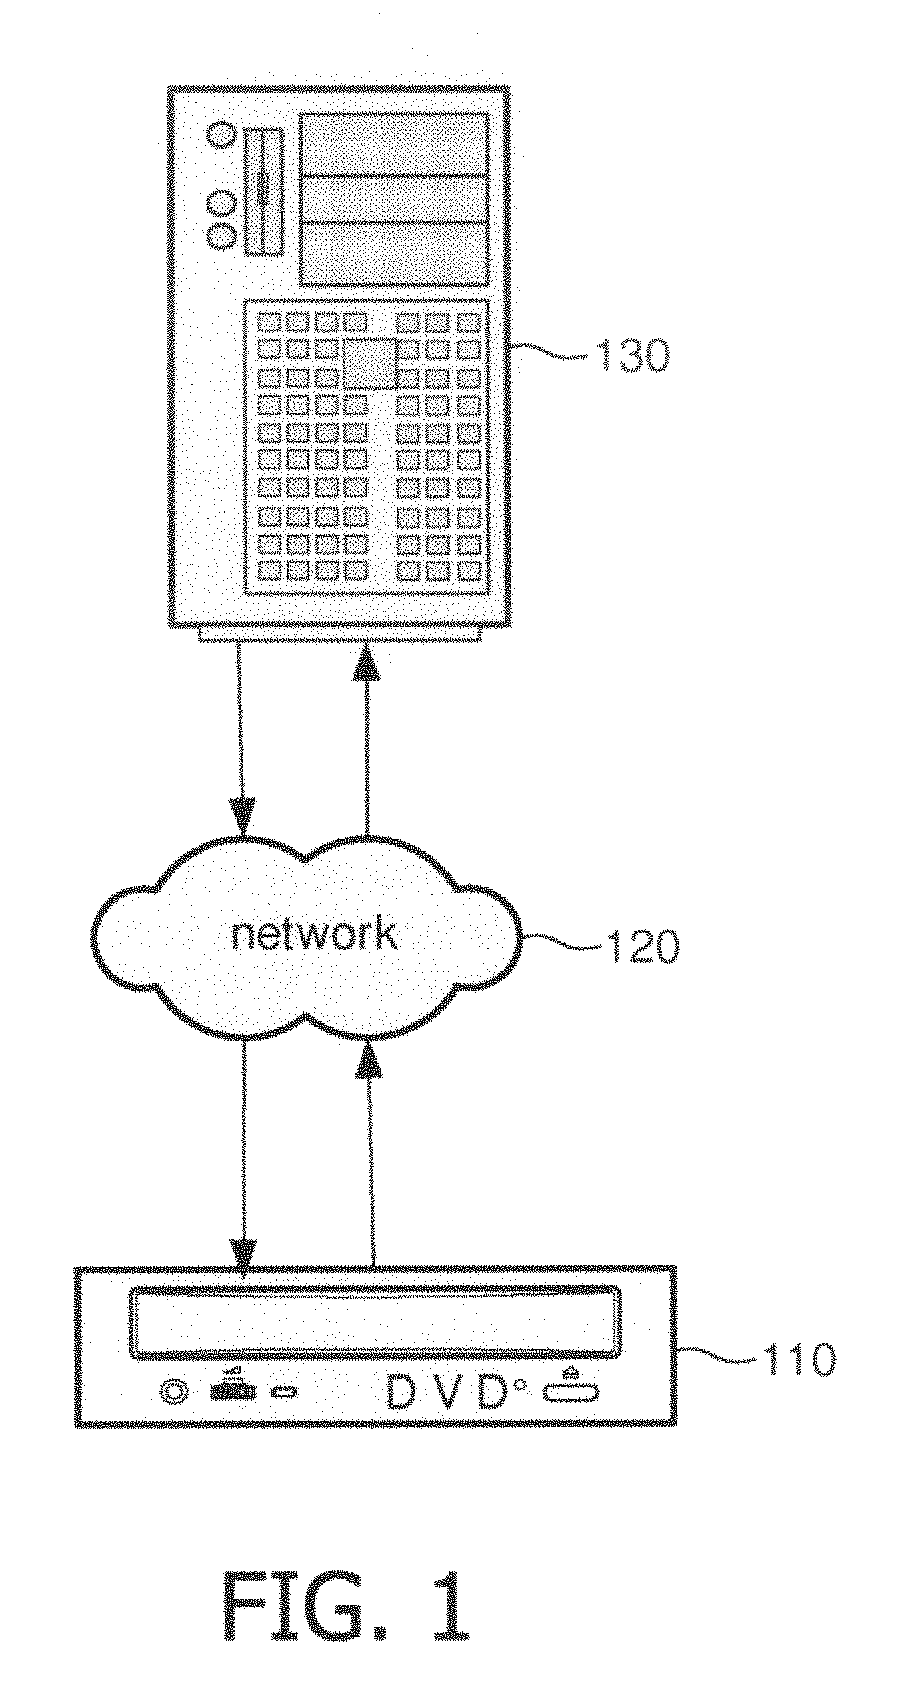 Method and apparatus for configuring software resources for playing network programs